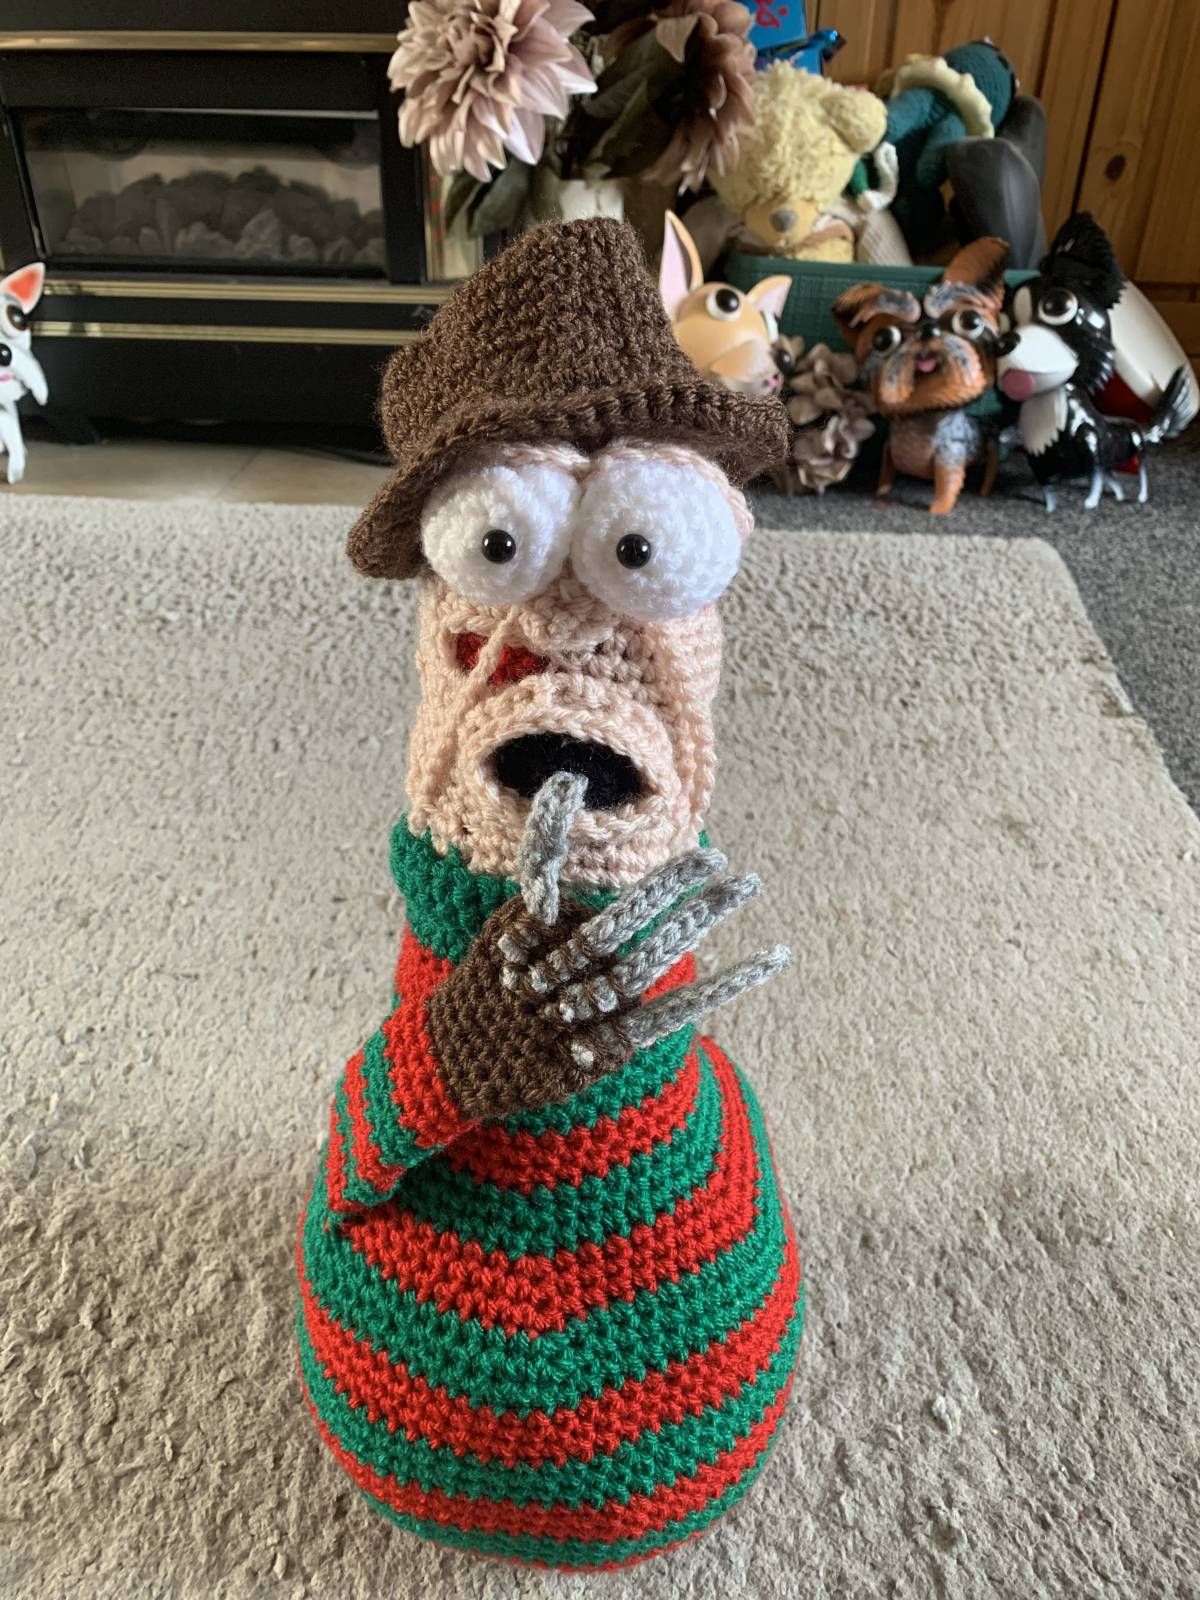 Amigurumi Freddy Krueger Crochet Pattern Review by Vicki Hope for Cottontail & Whiskers